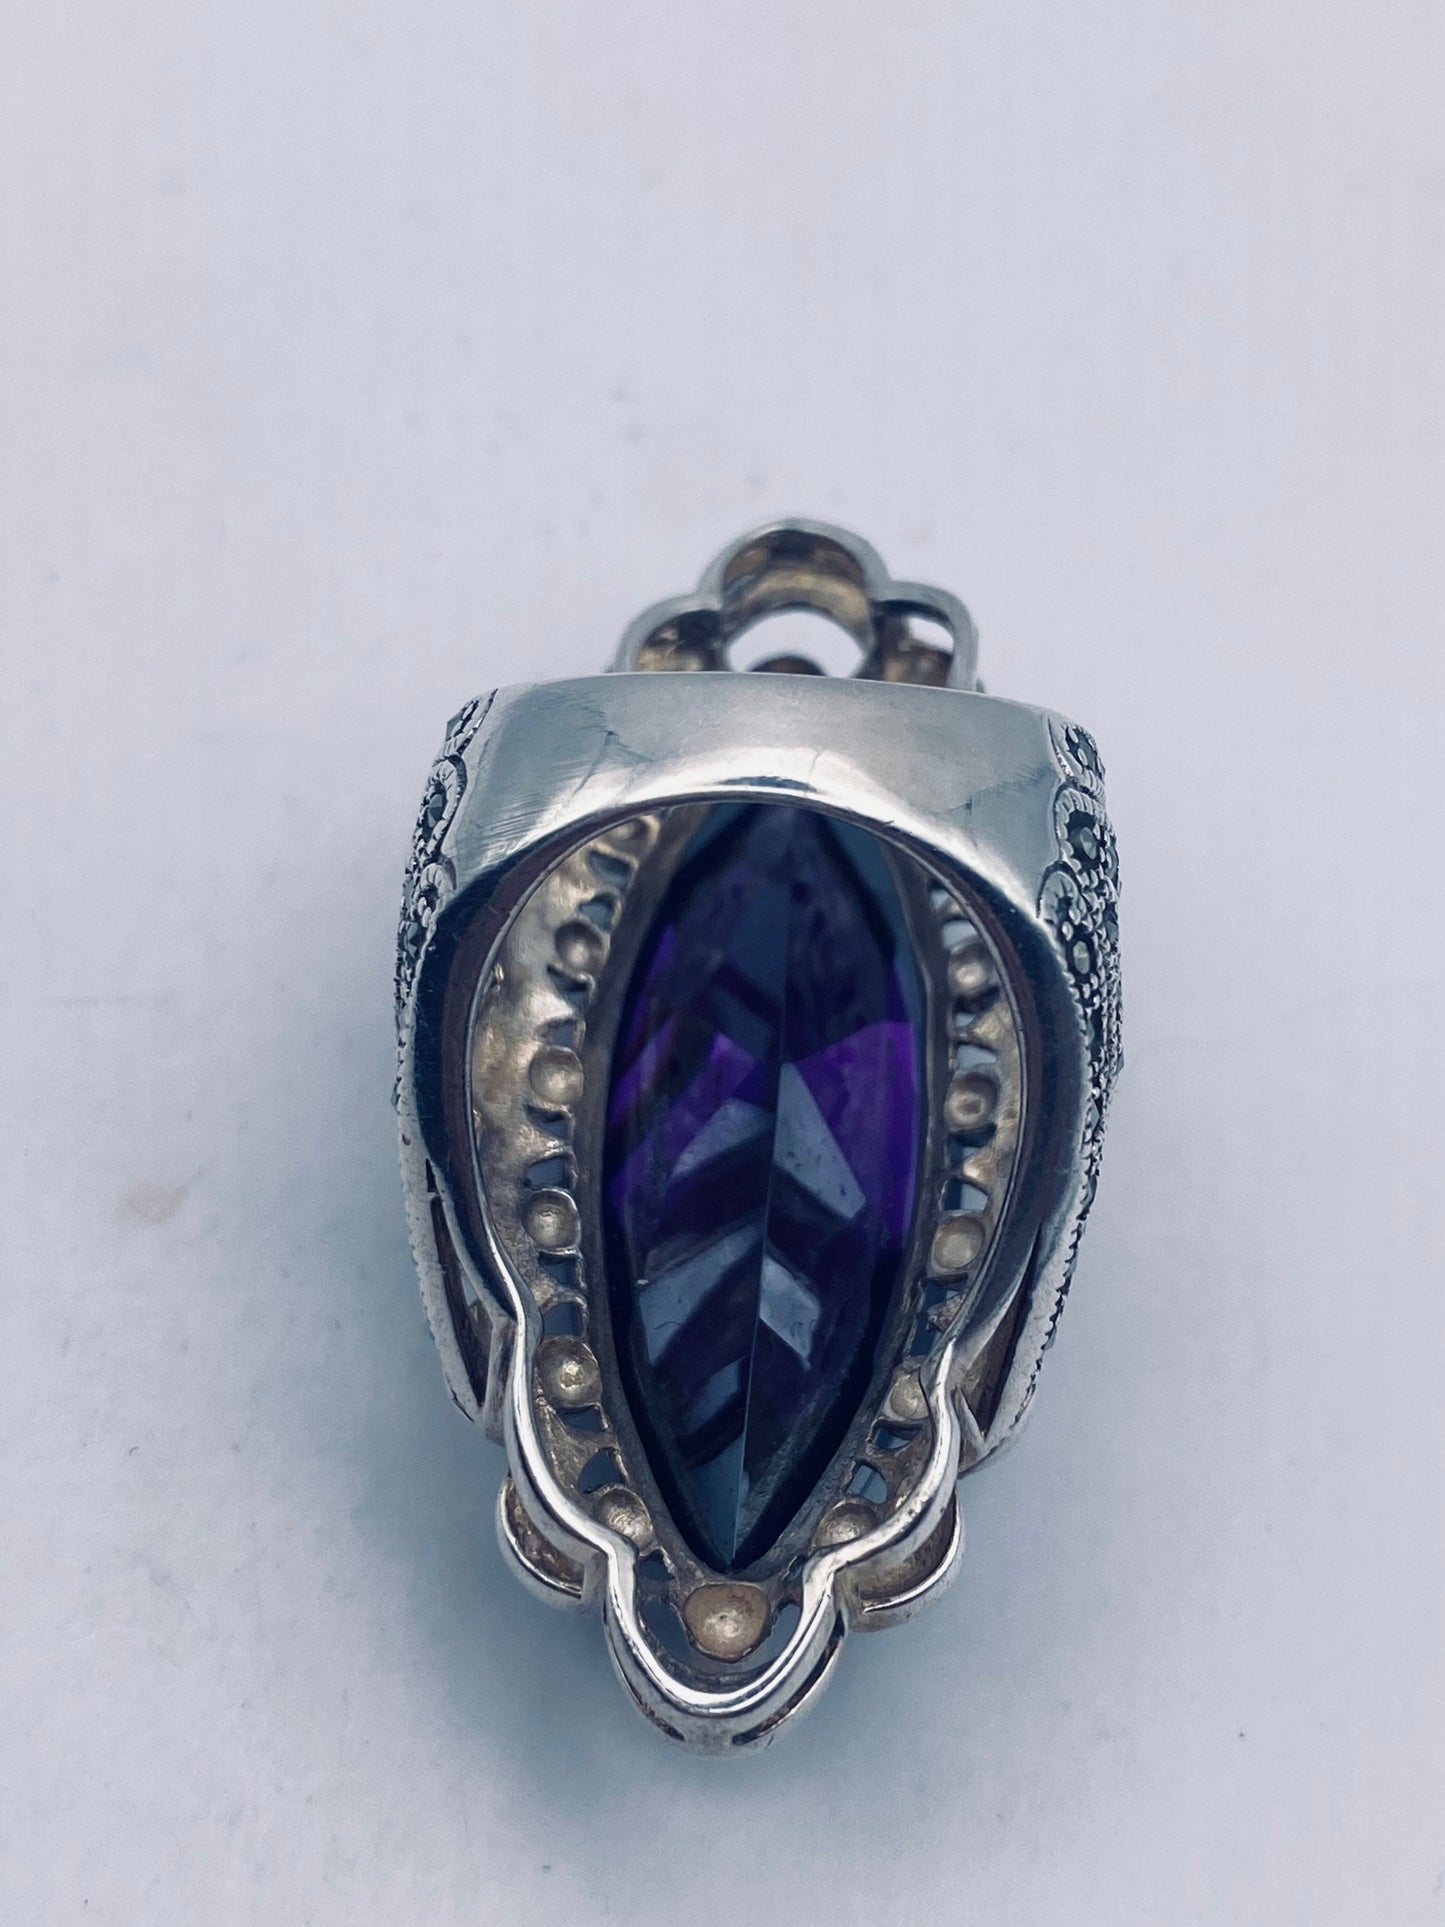 Vintage Swiss Marcasite Amethyst Crystal Setting 925 Sterling Silver Cocktail Ring Size 6